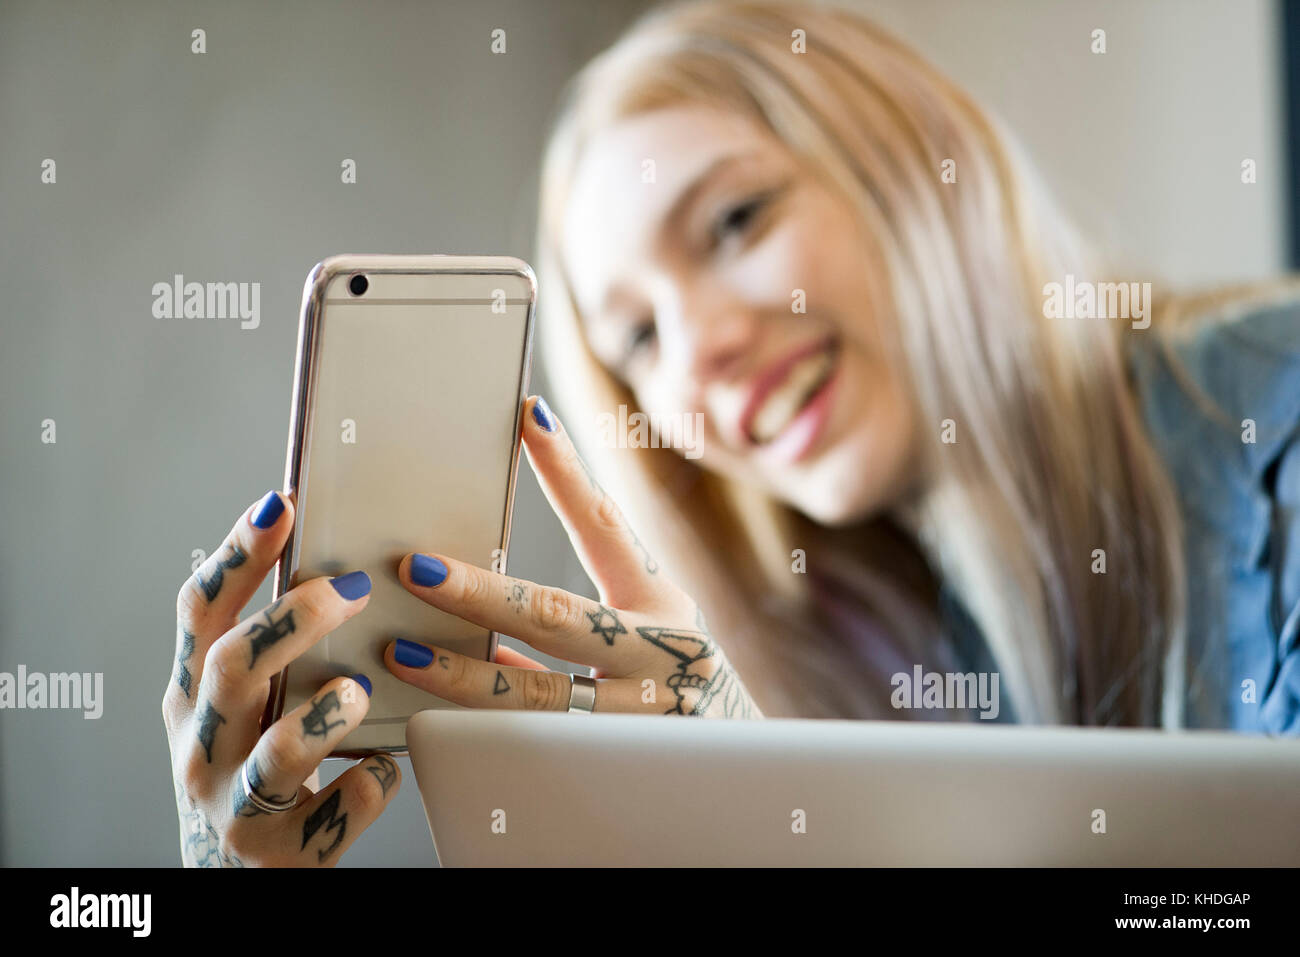 Woman holding smartphone and smiling Banque D'Images